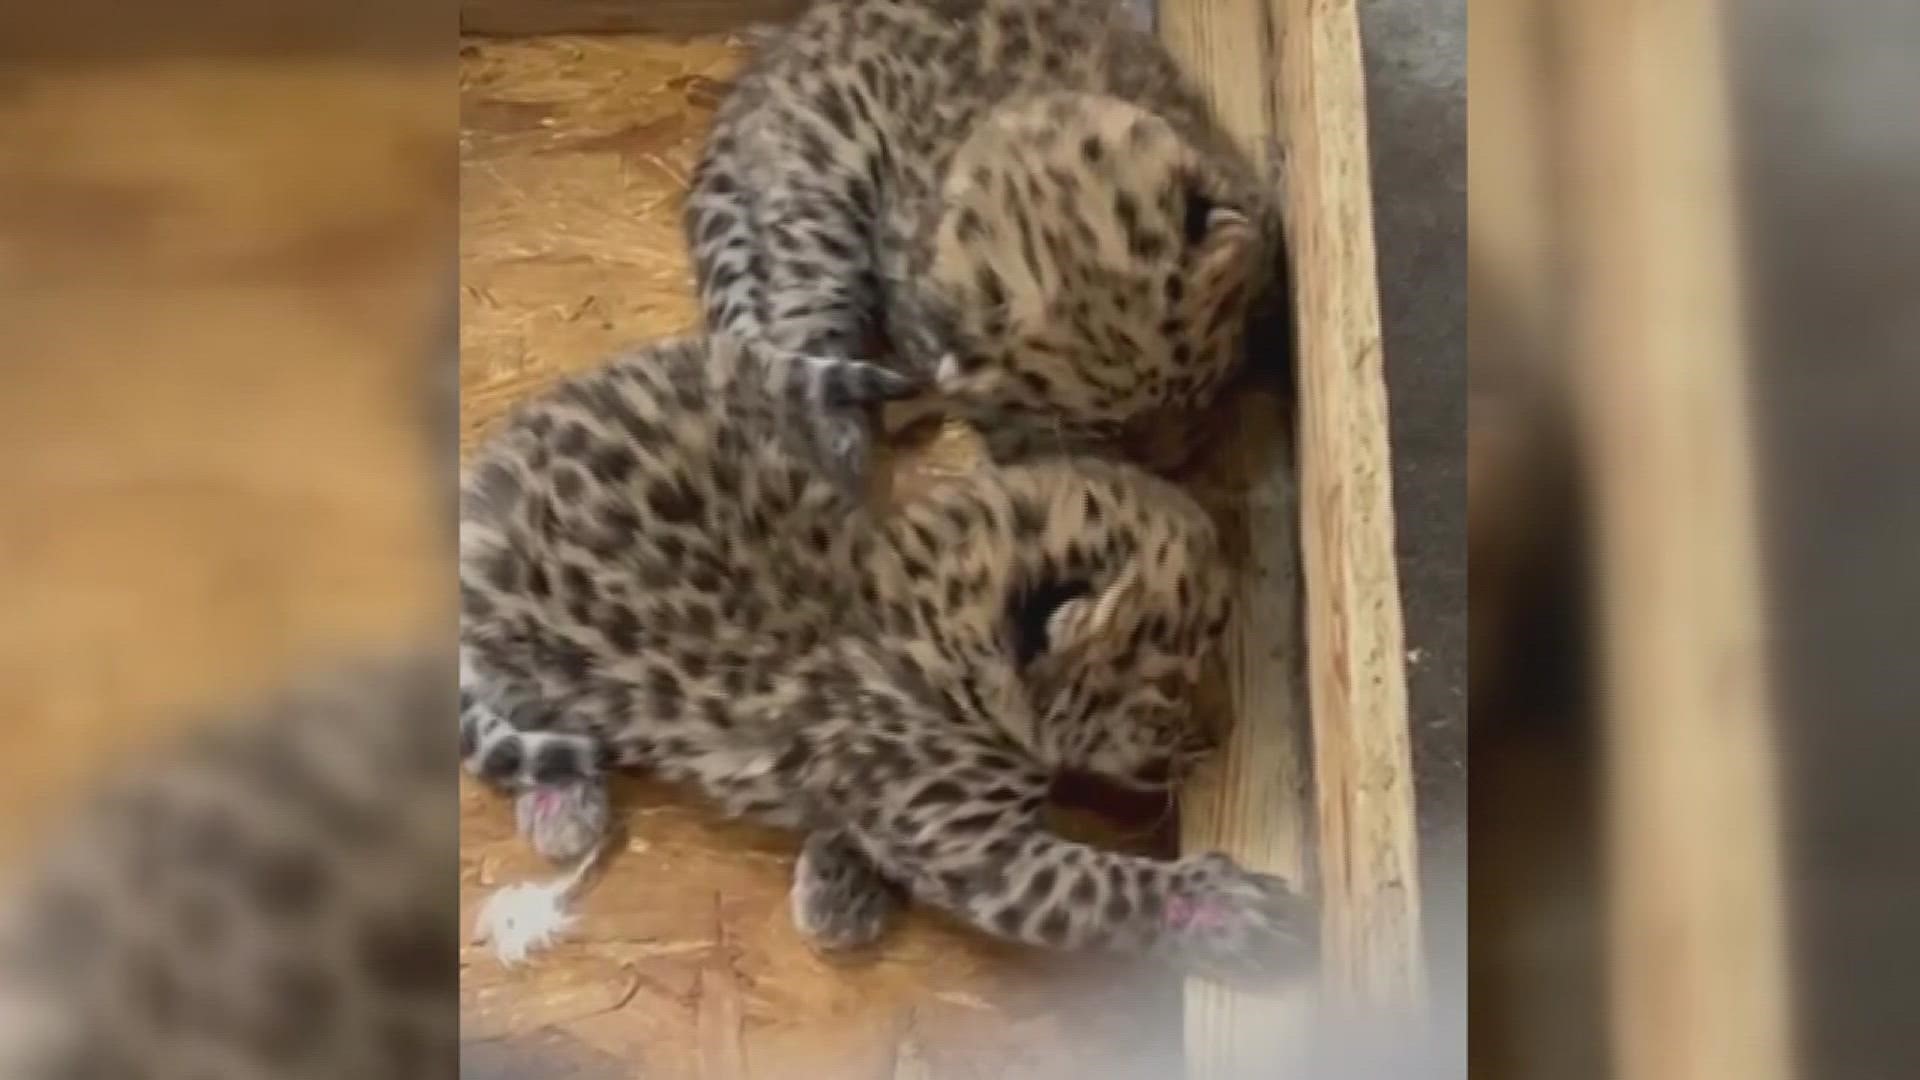 Niabi announced the birth of two critically endangered Amur leopard cubs - the first report of captive breeding for the species this year.